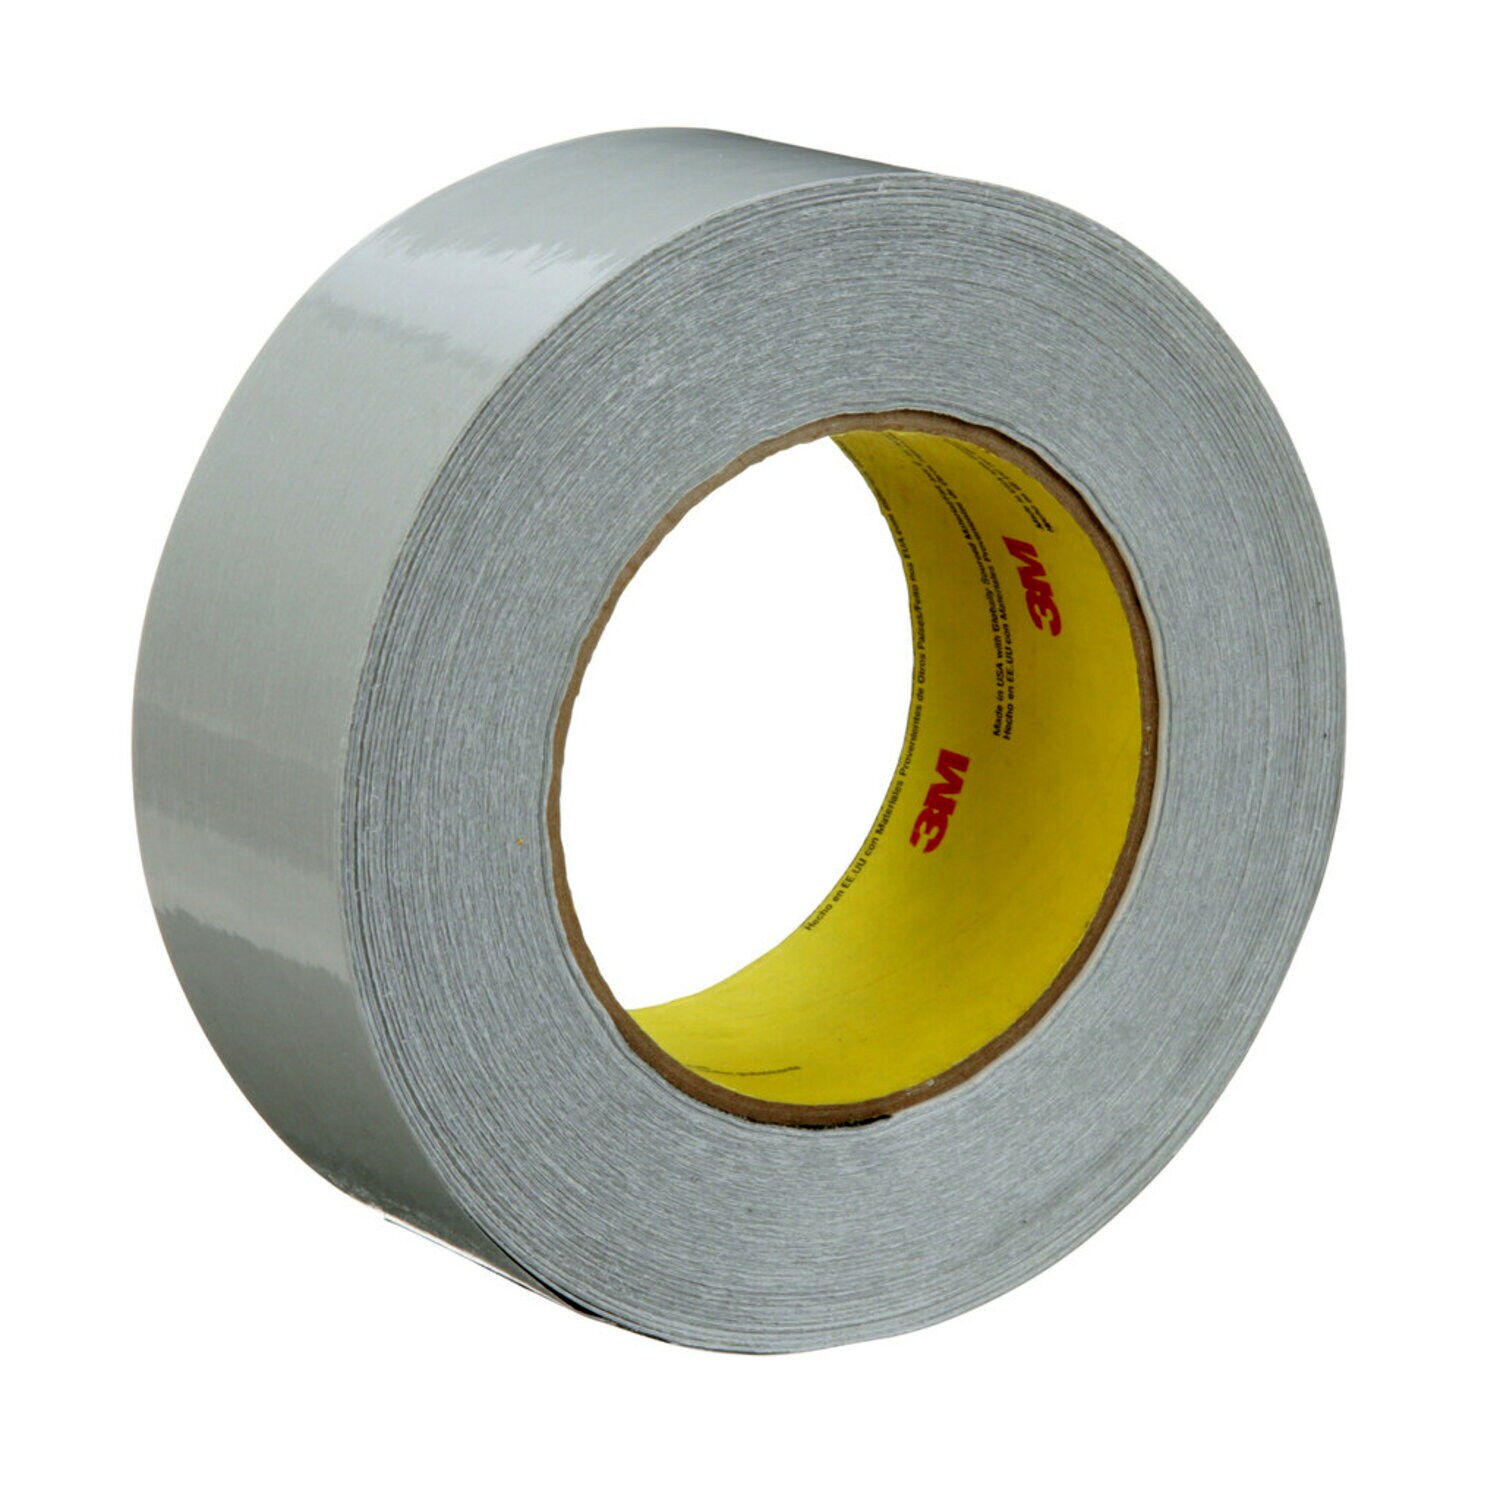 Extra Strong Hook Loop Tape, 25mm x 178 mm - 12 Pairs